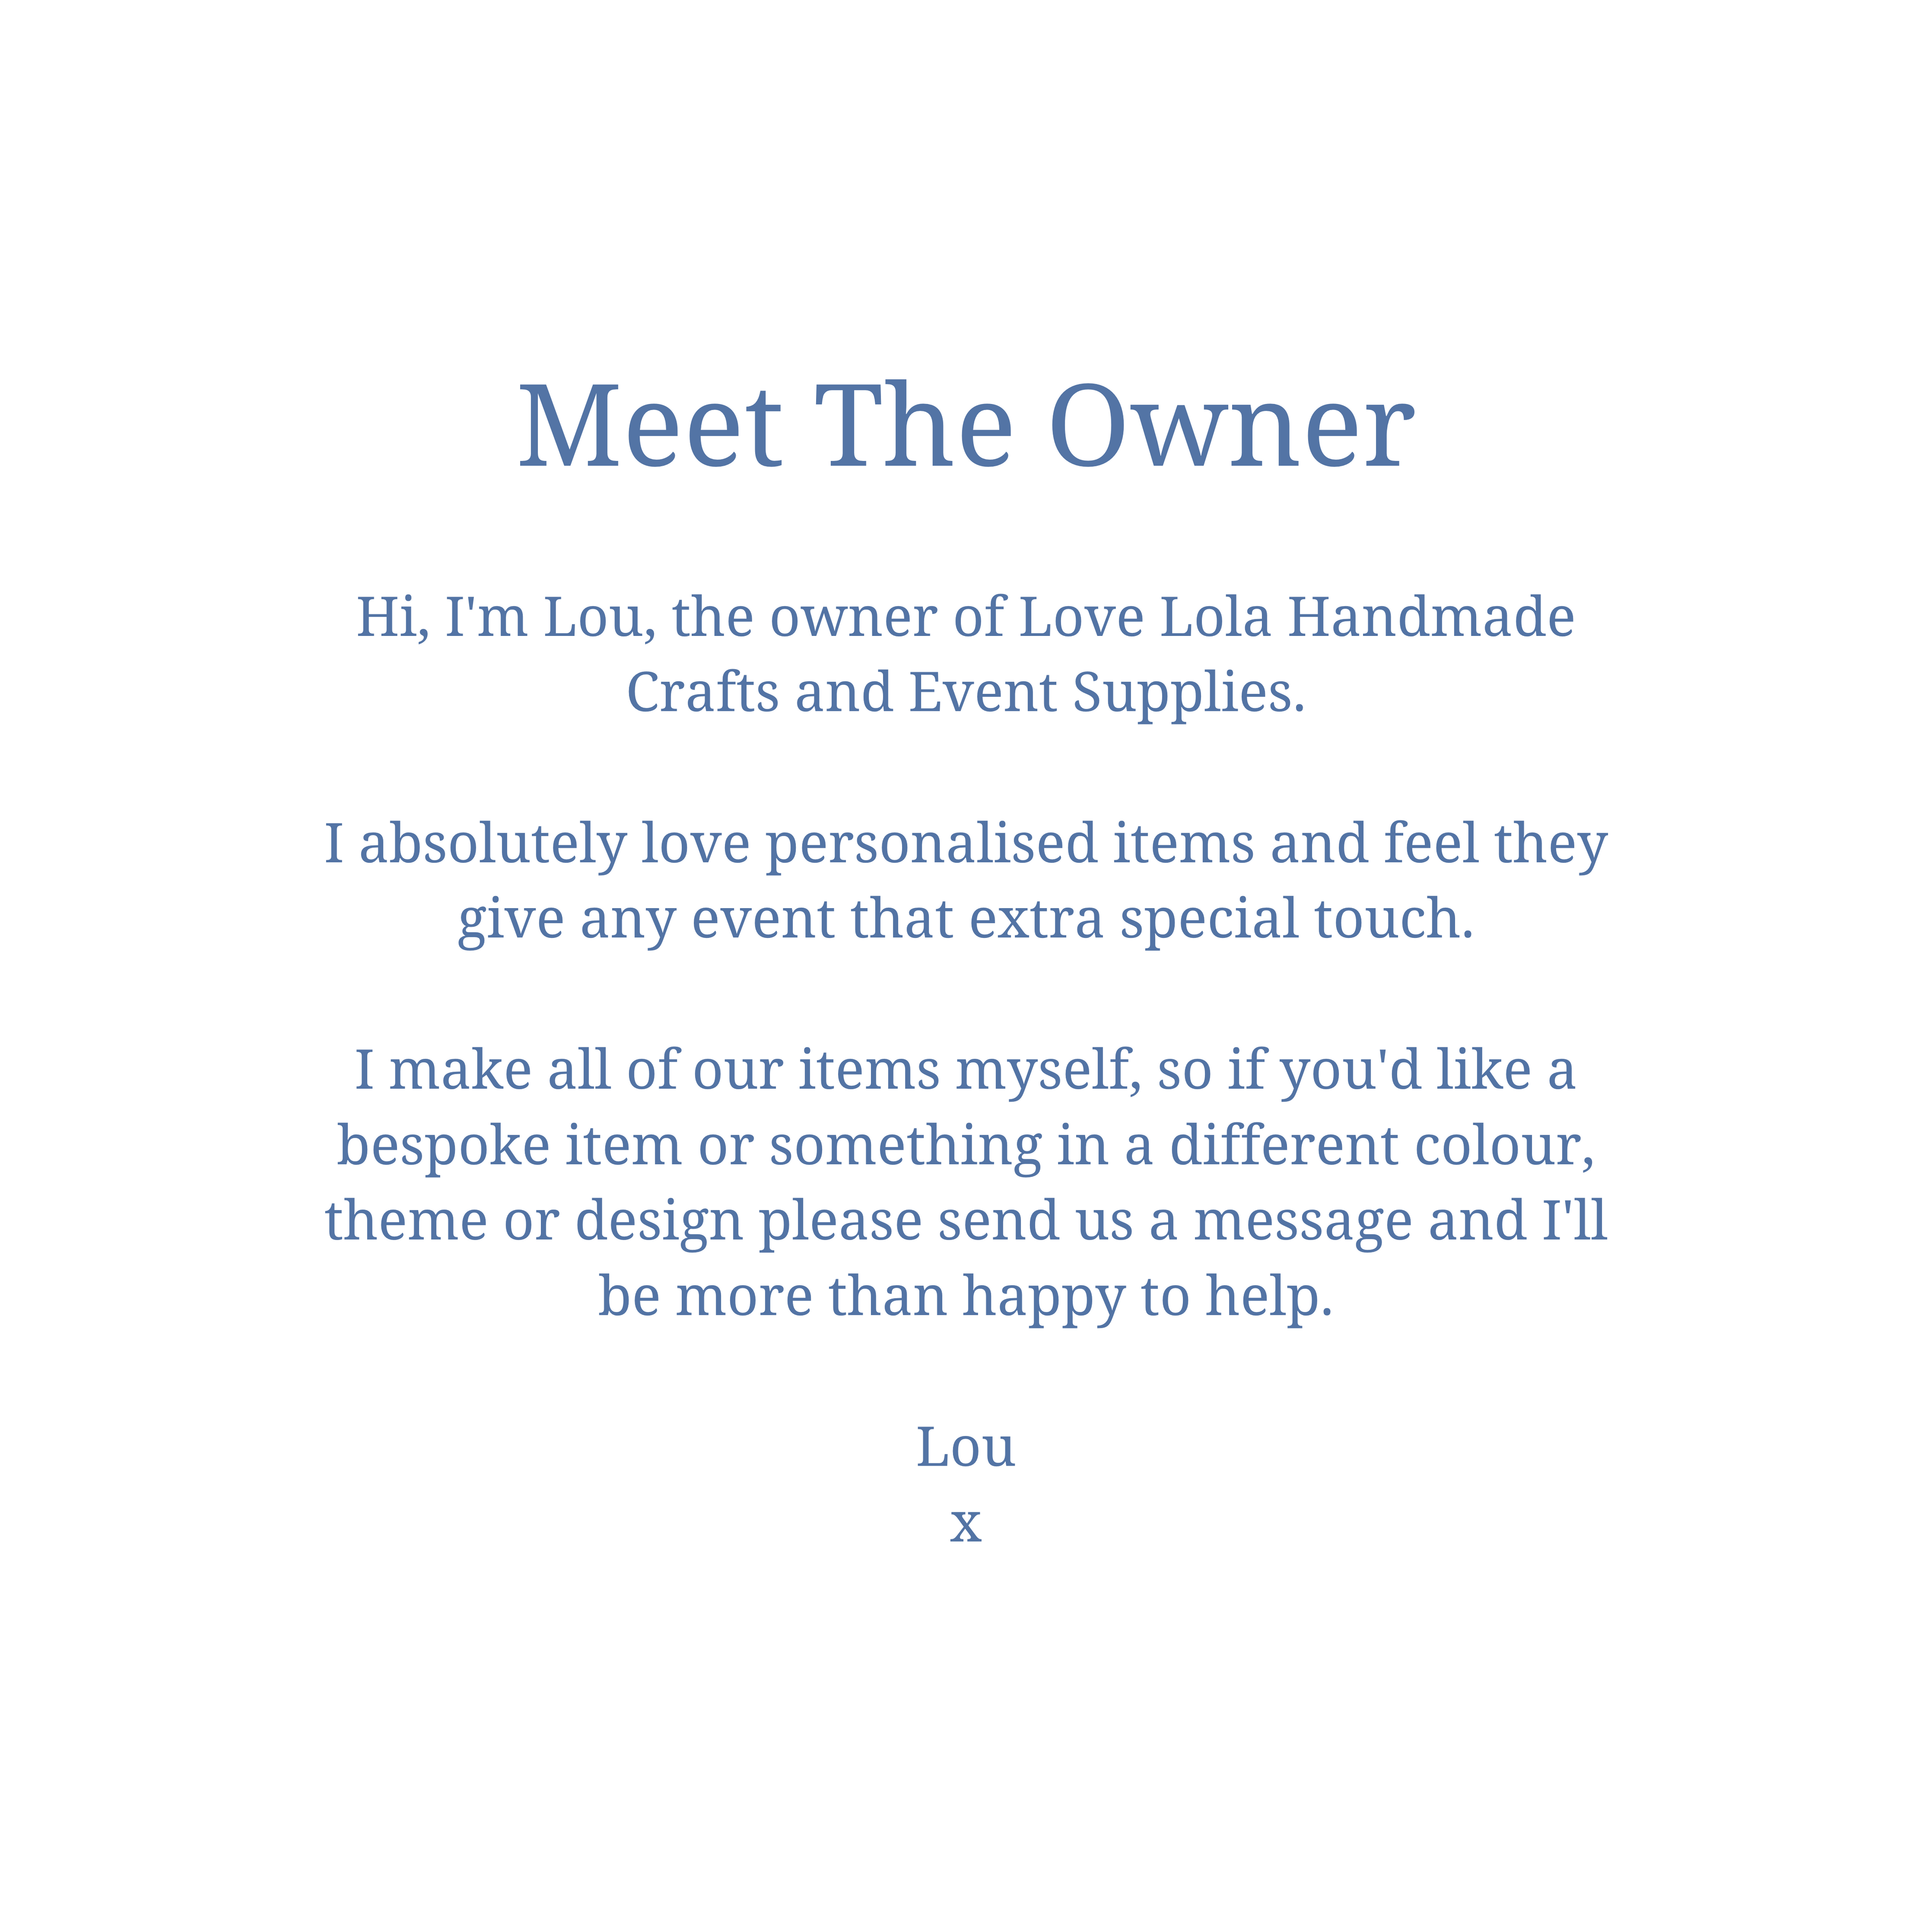 Meet The Owner  Hi, I'm Lou, the owner of Love Lola Handmade Crafts and Event Supplies.  I absolutely love personalised items and feel they give any event that extra special touch.  I make all of our items myself, so if you'd like a bespoke item or something in a different colour, theme or design please send us a message and I'll be more than happy to help.  Lou